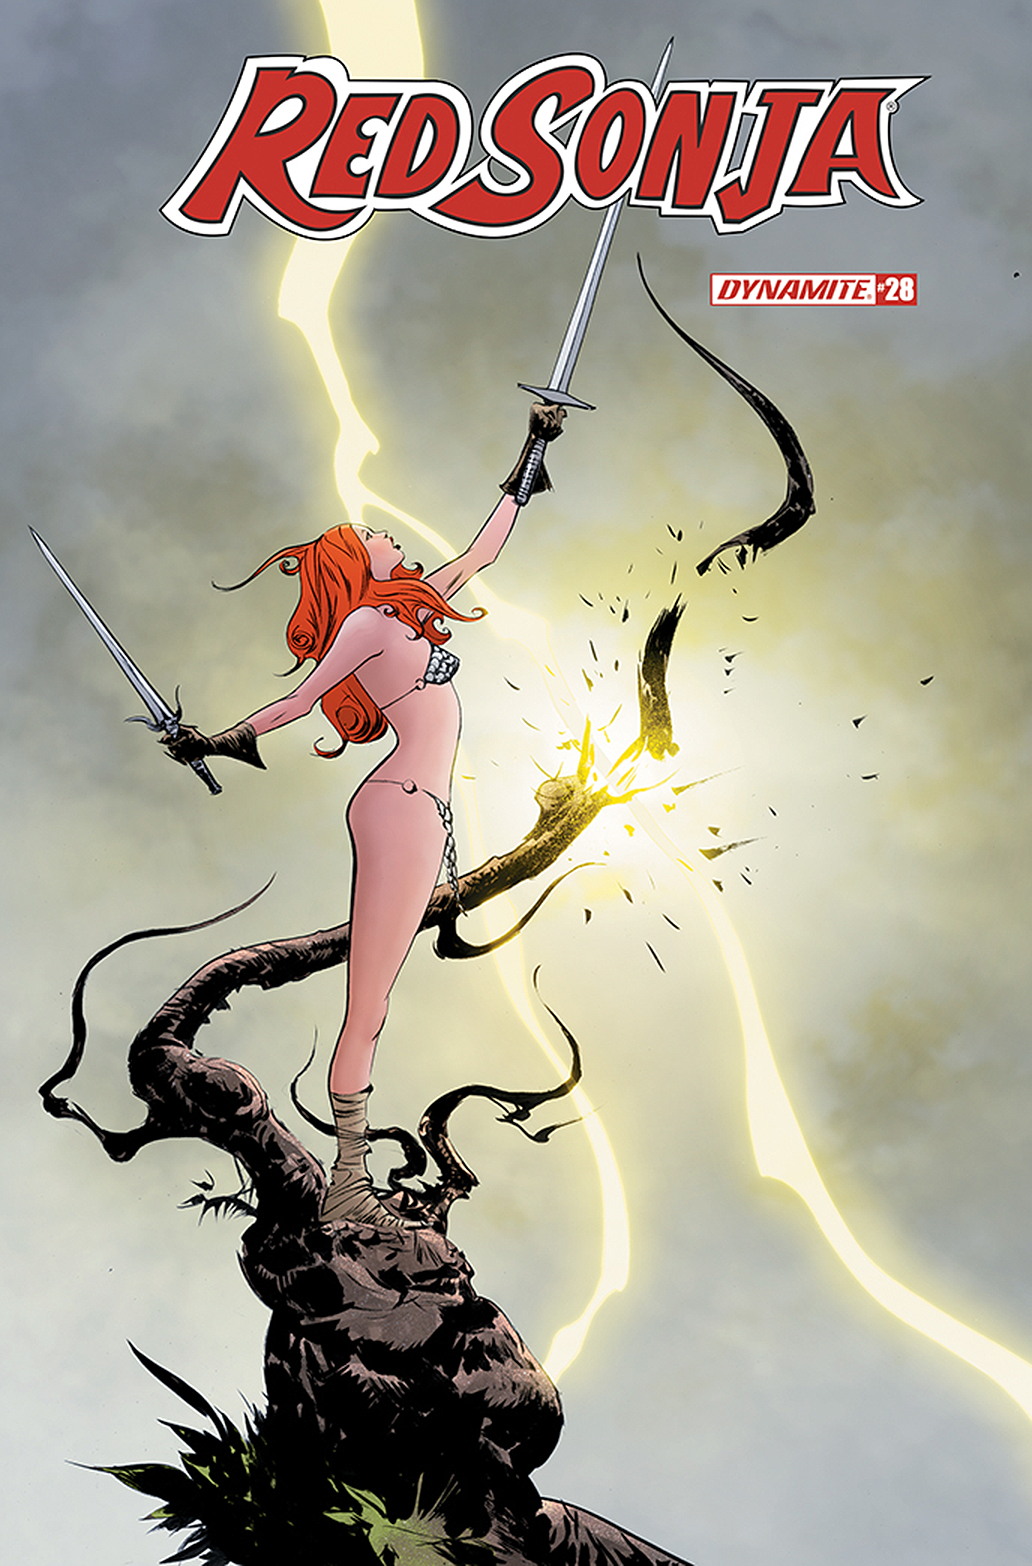 Red Sonja #28 Cover A Lee